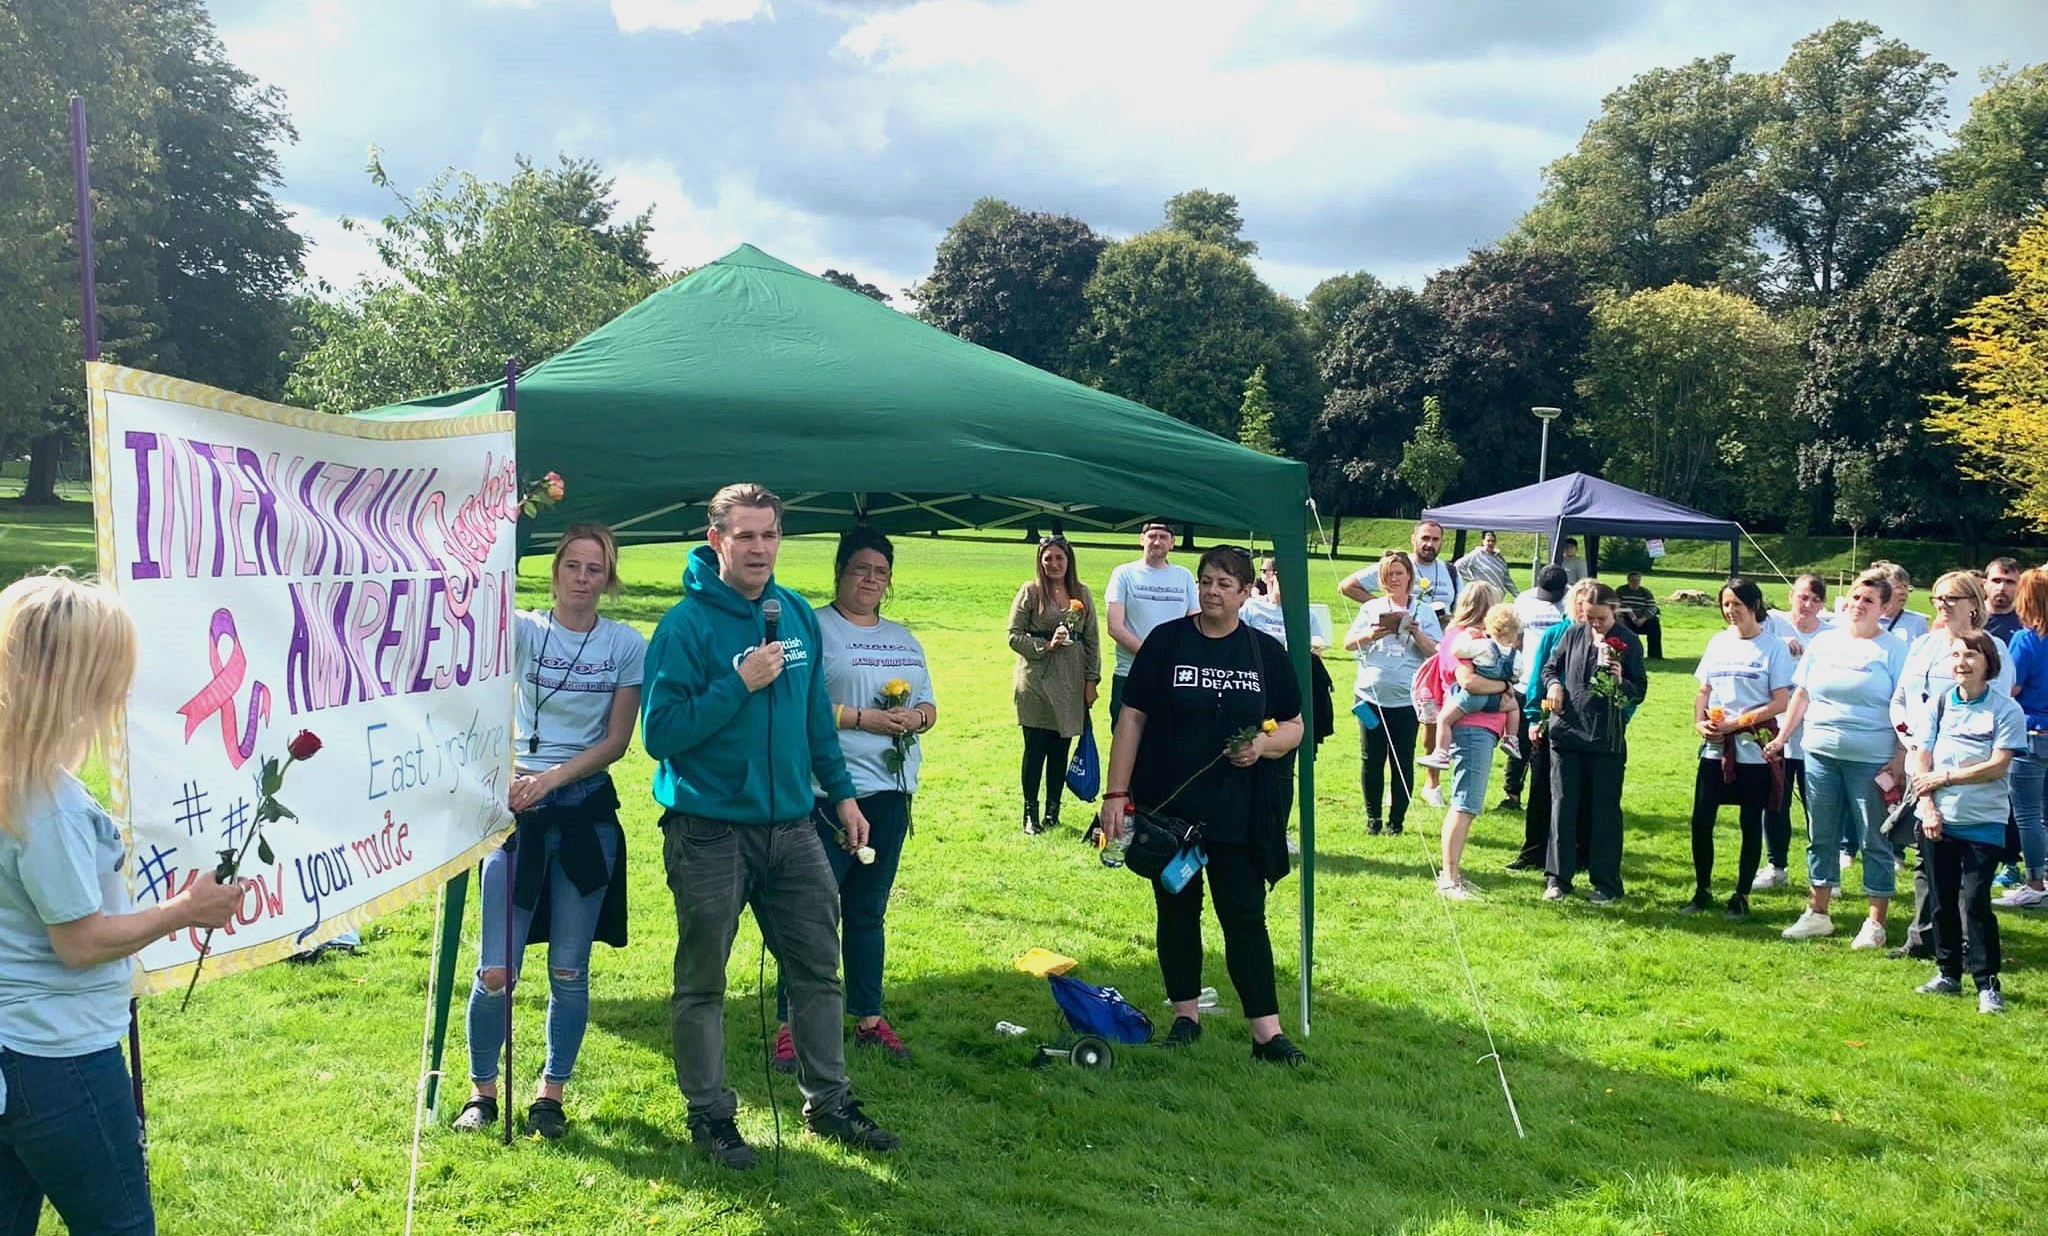 Attendees at the recovery event in Kilmarnock's Howard Park